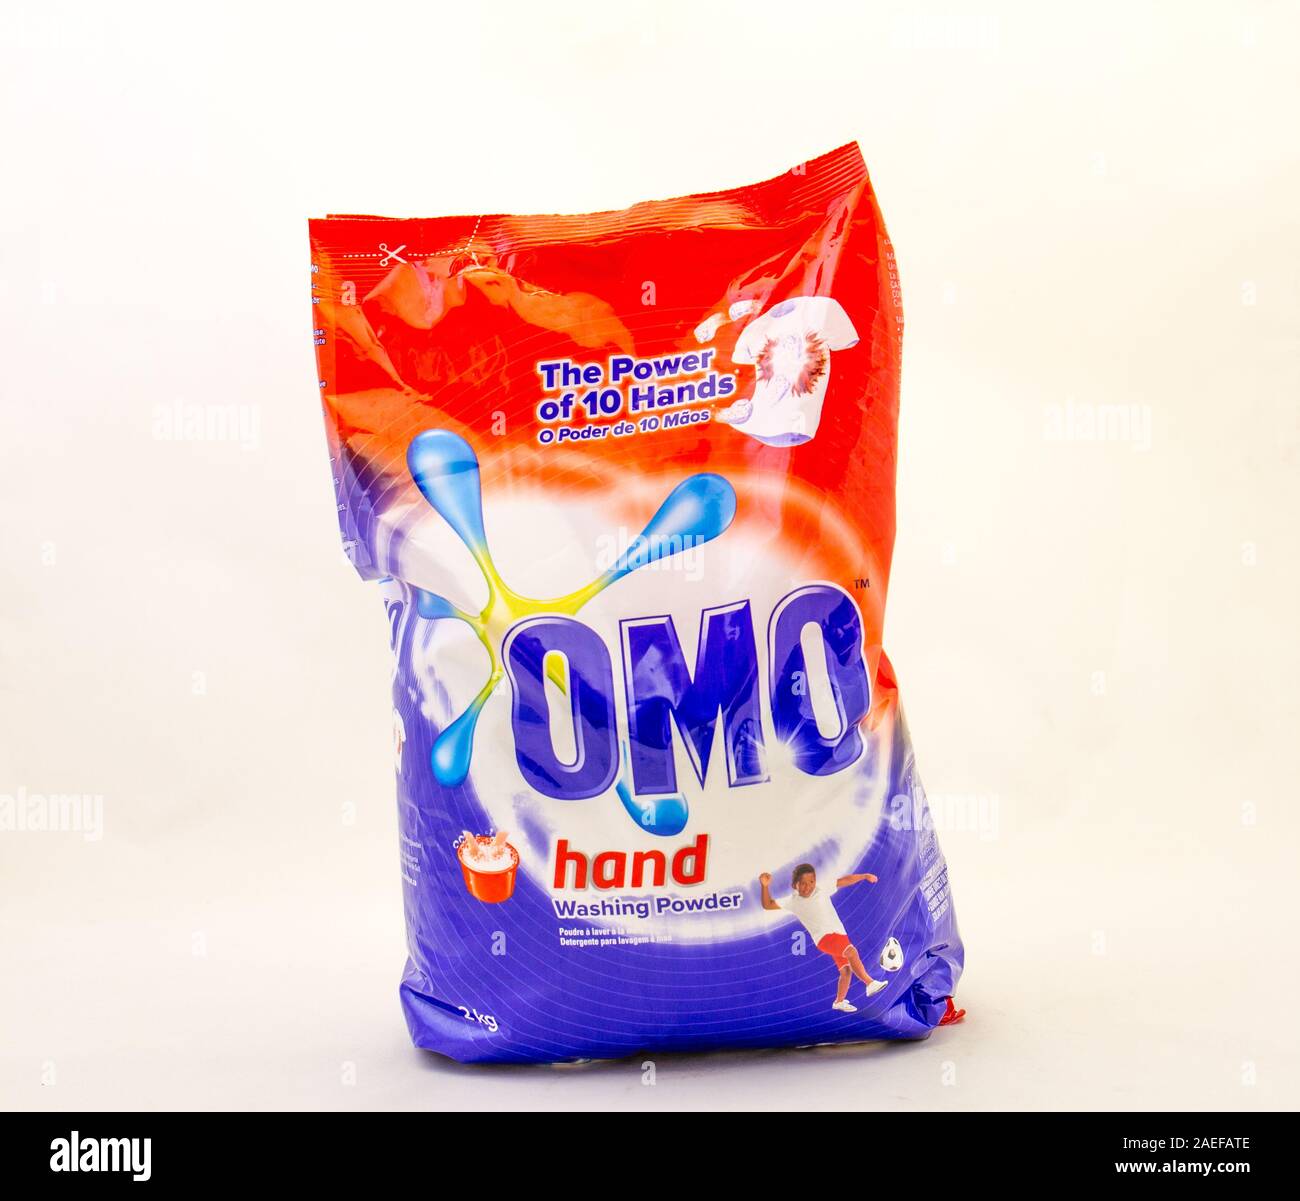 Alberton, South Africa - a bag of Omo hand washing laundry soap powder isolated on a clear background image with copy space Stock Photo